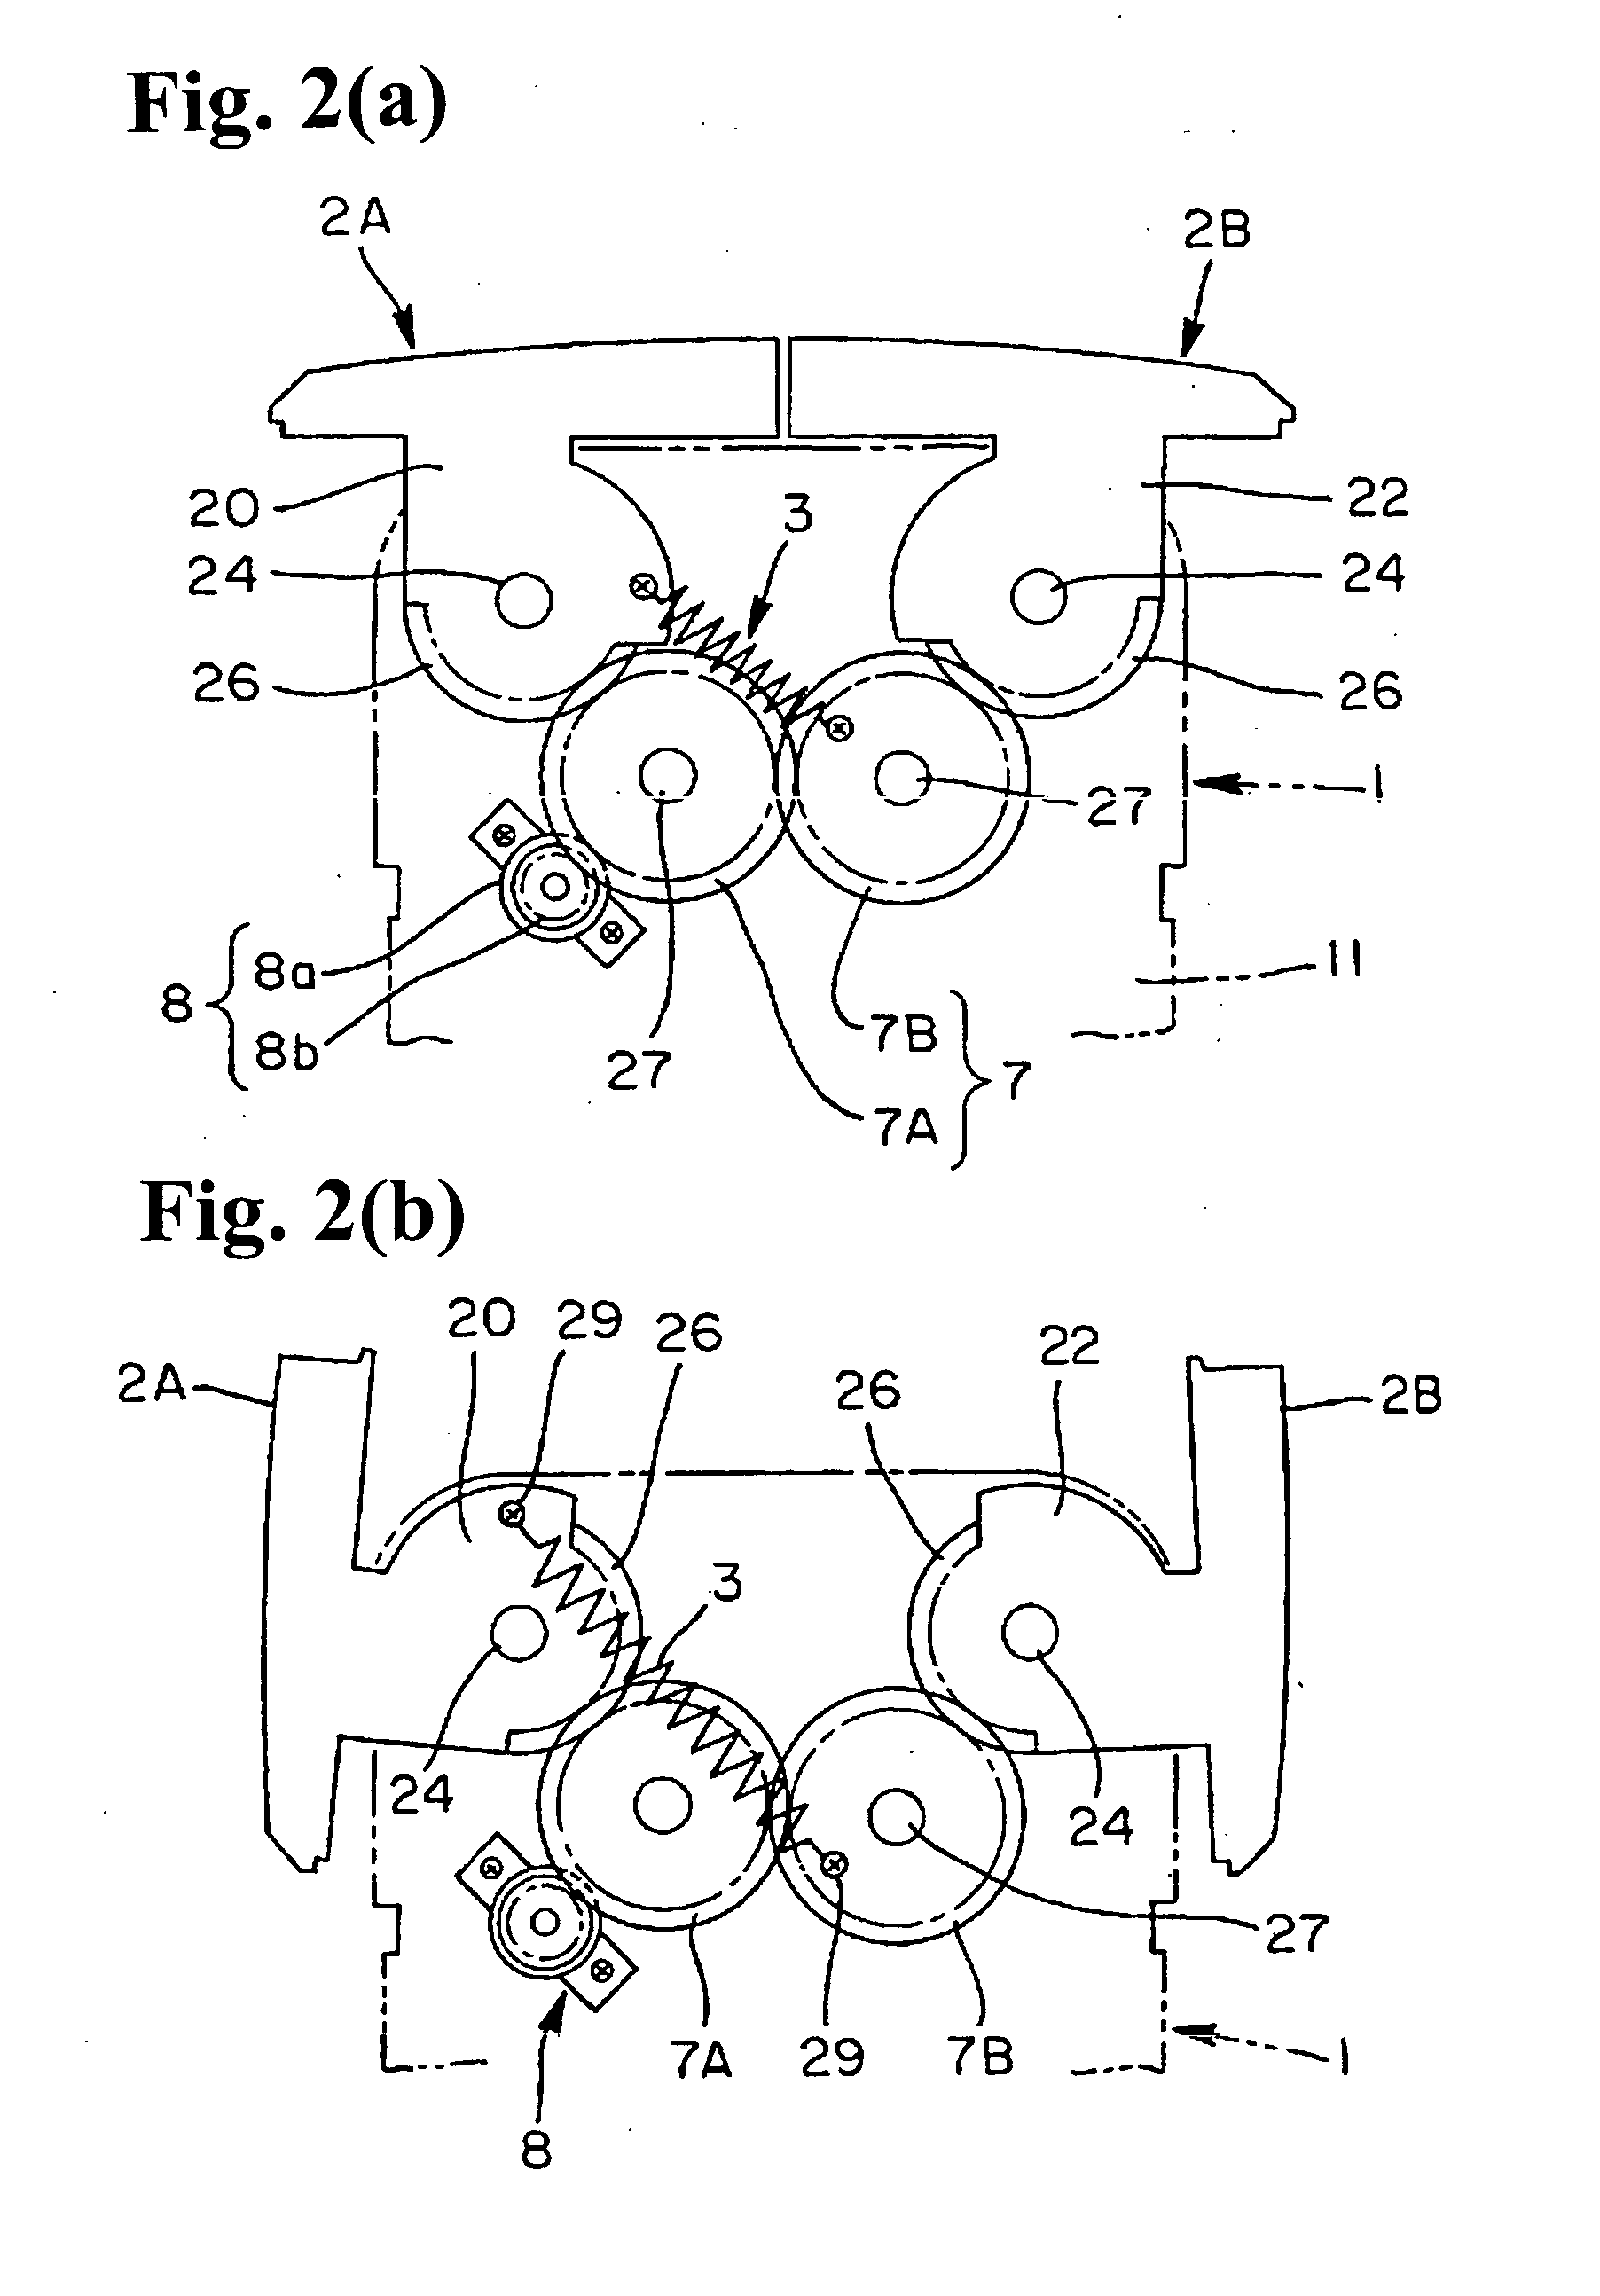 Cover opening and closing mechanism